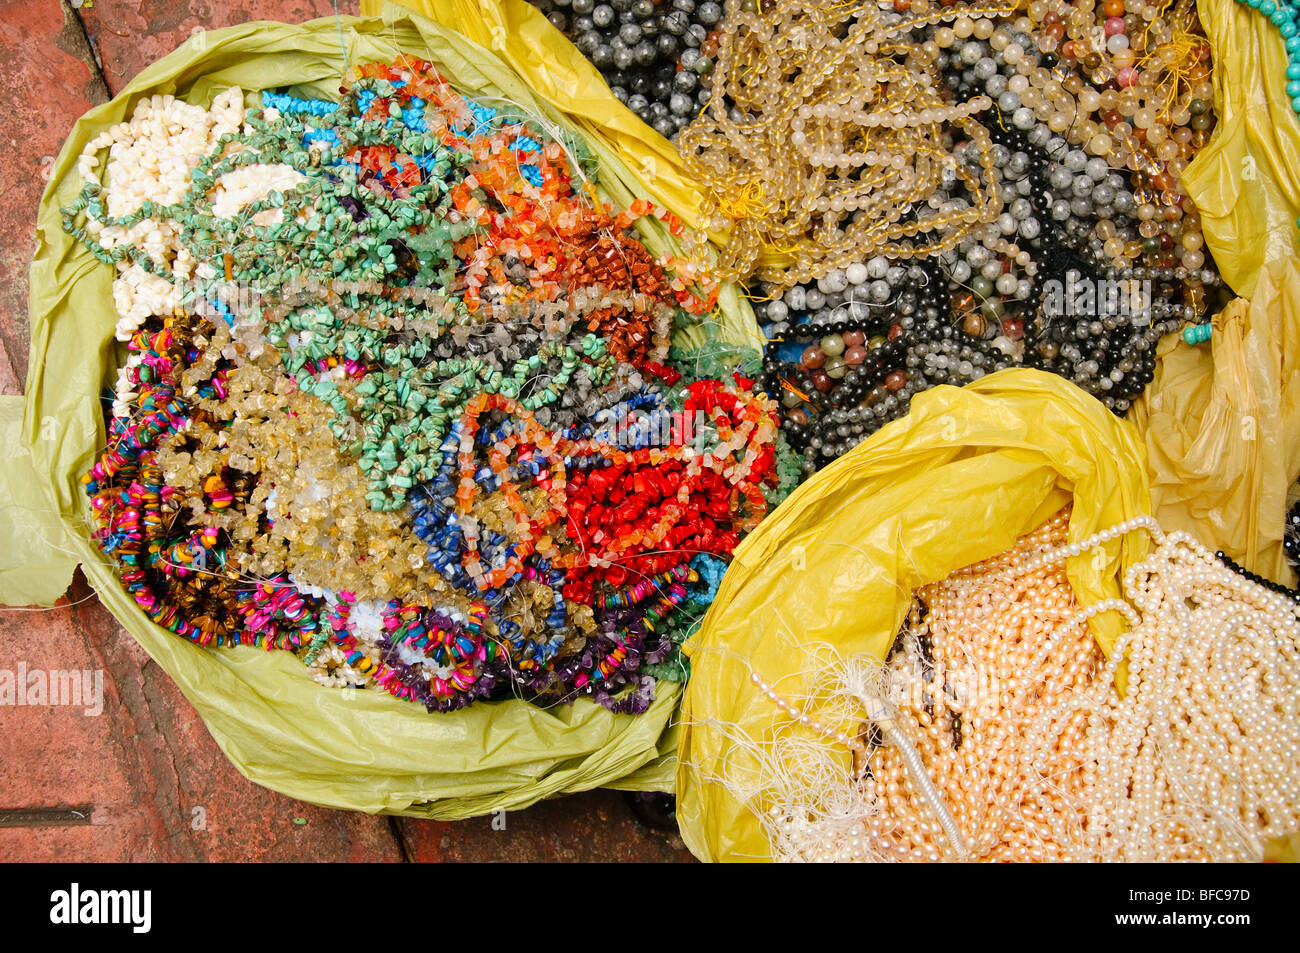 Beads, colored gems, pearls and stones for sale in Chinatown, Bangkok, Thailand Stock Photo